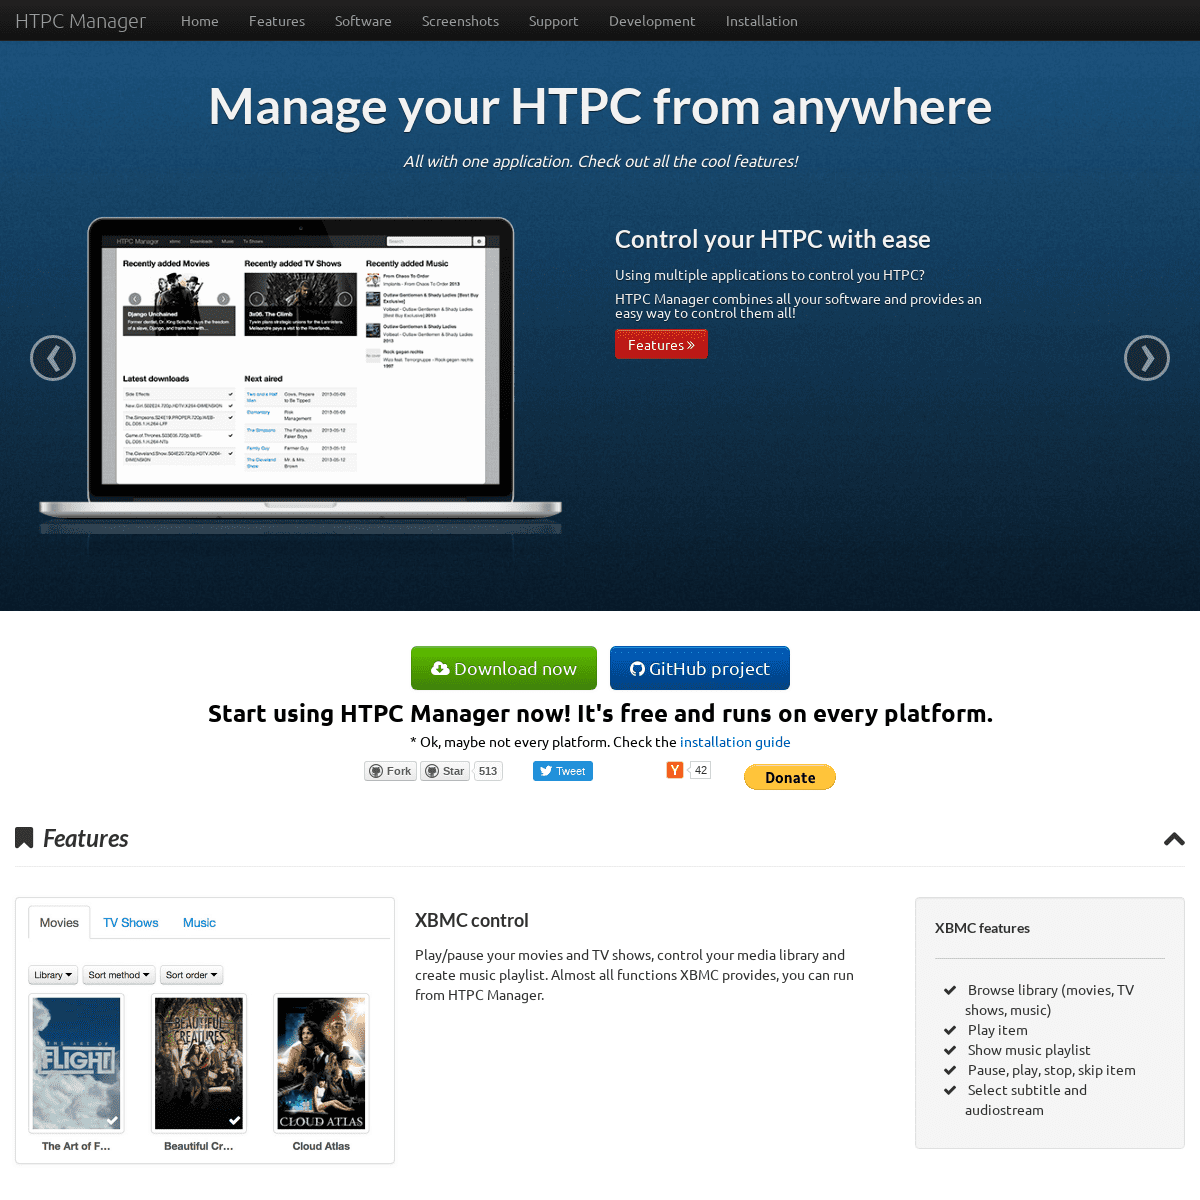 HTPC Manager